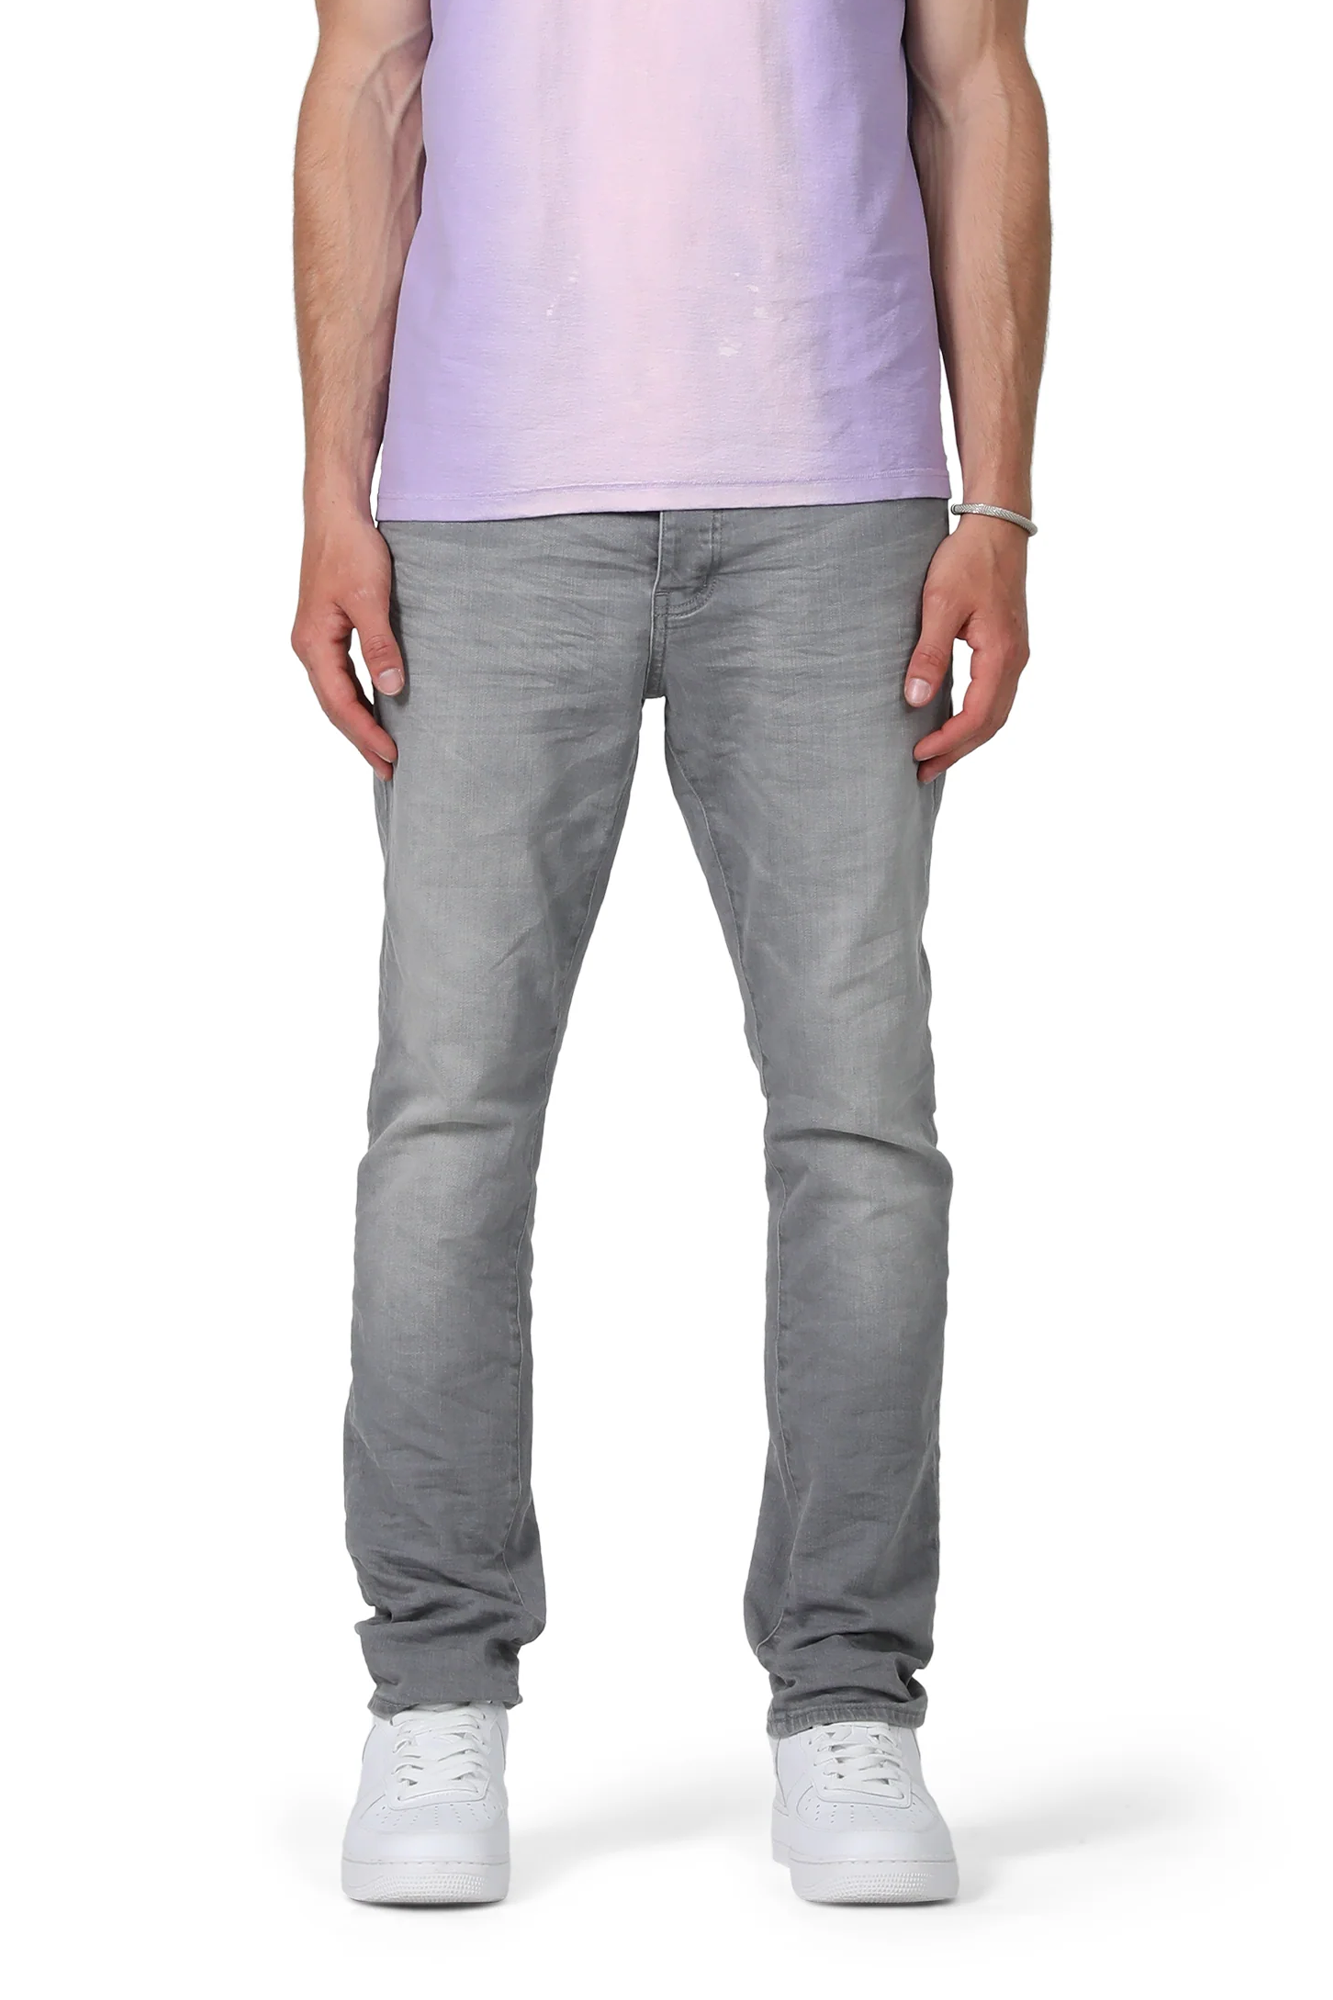 Purple Brand Faded Grey Aged Jeans – Upper Level 916